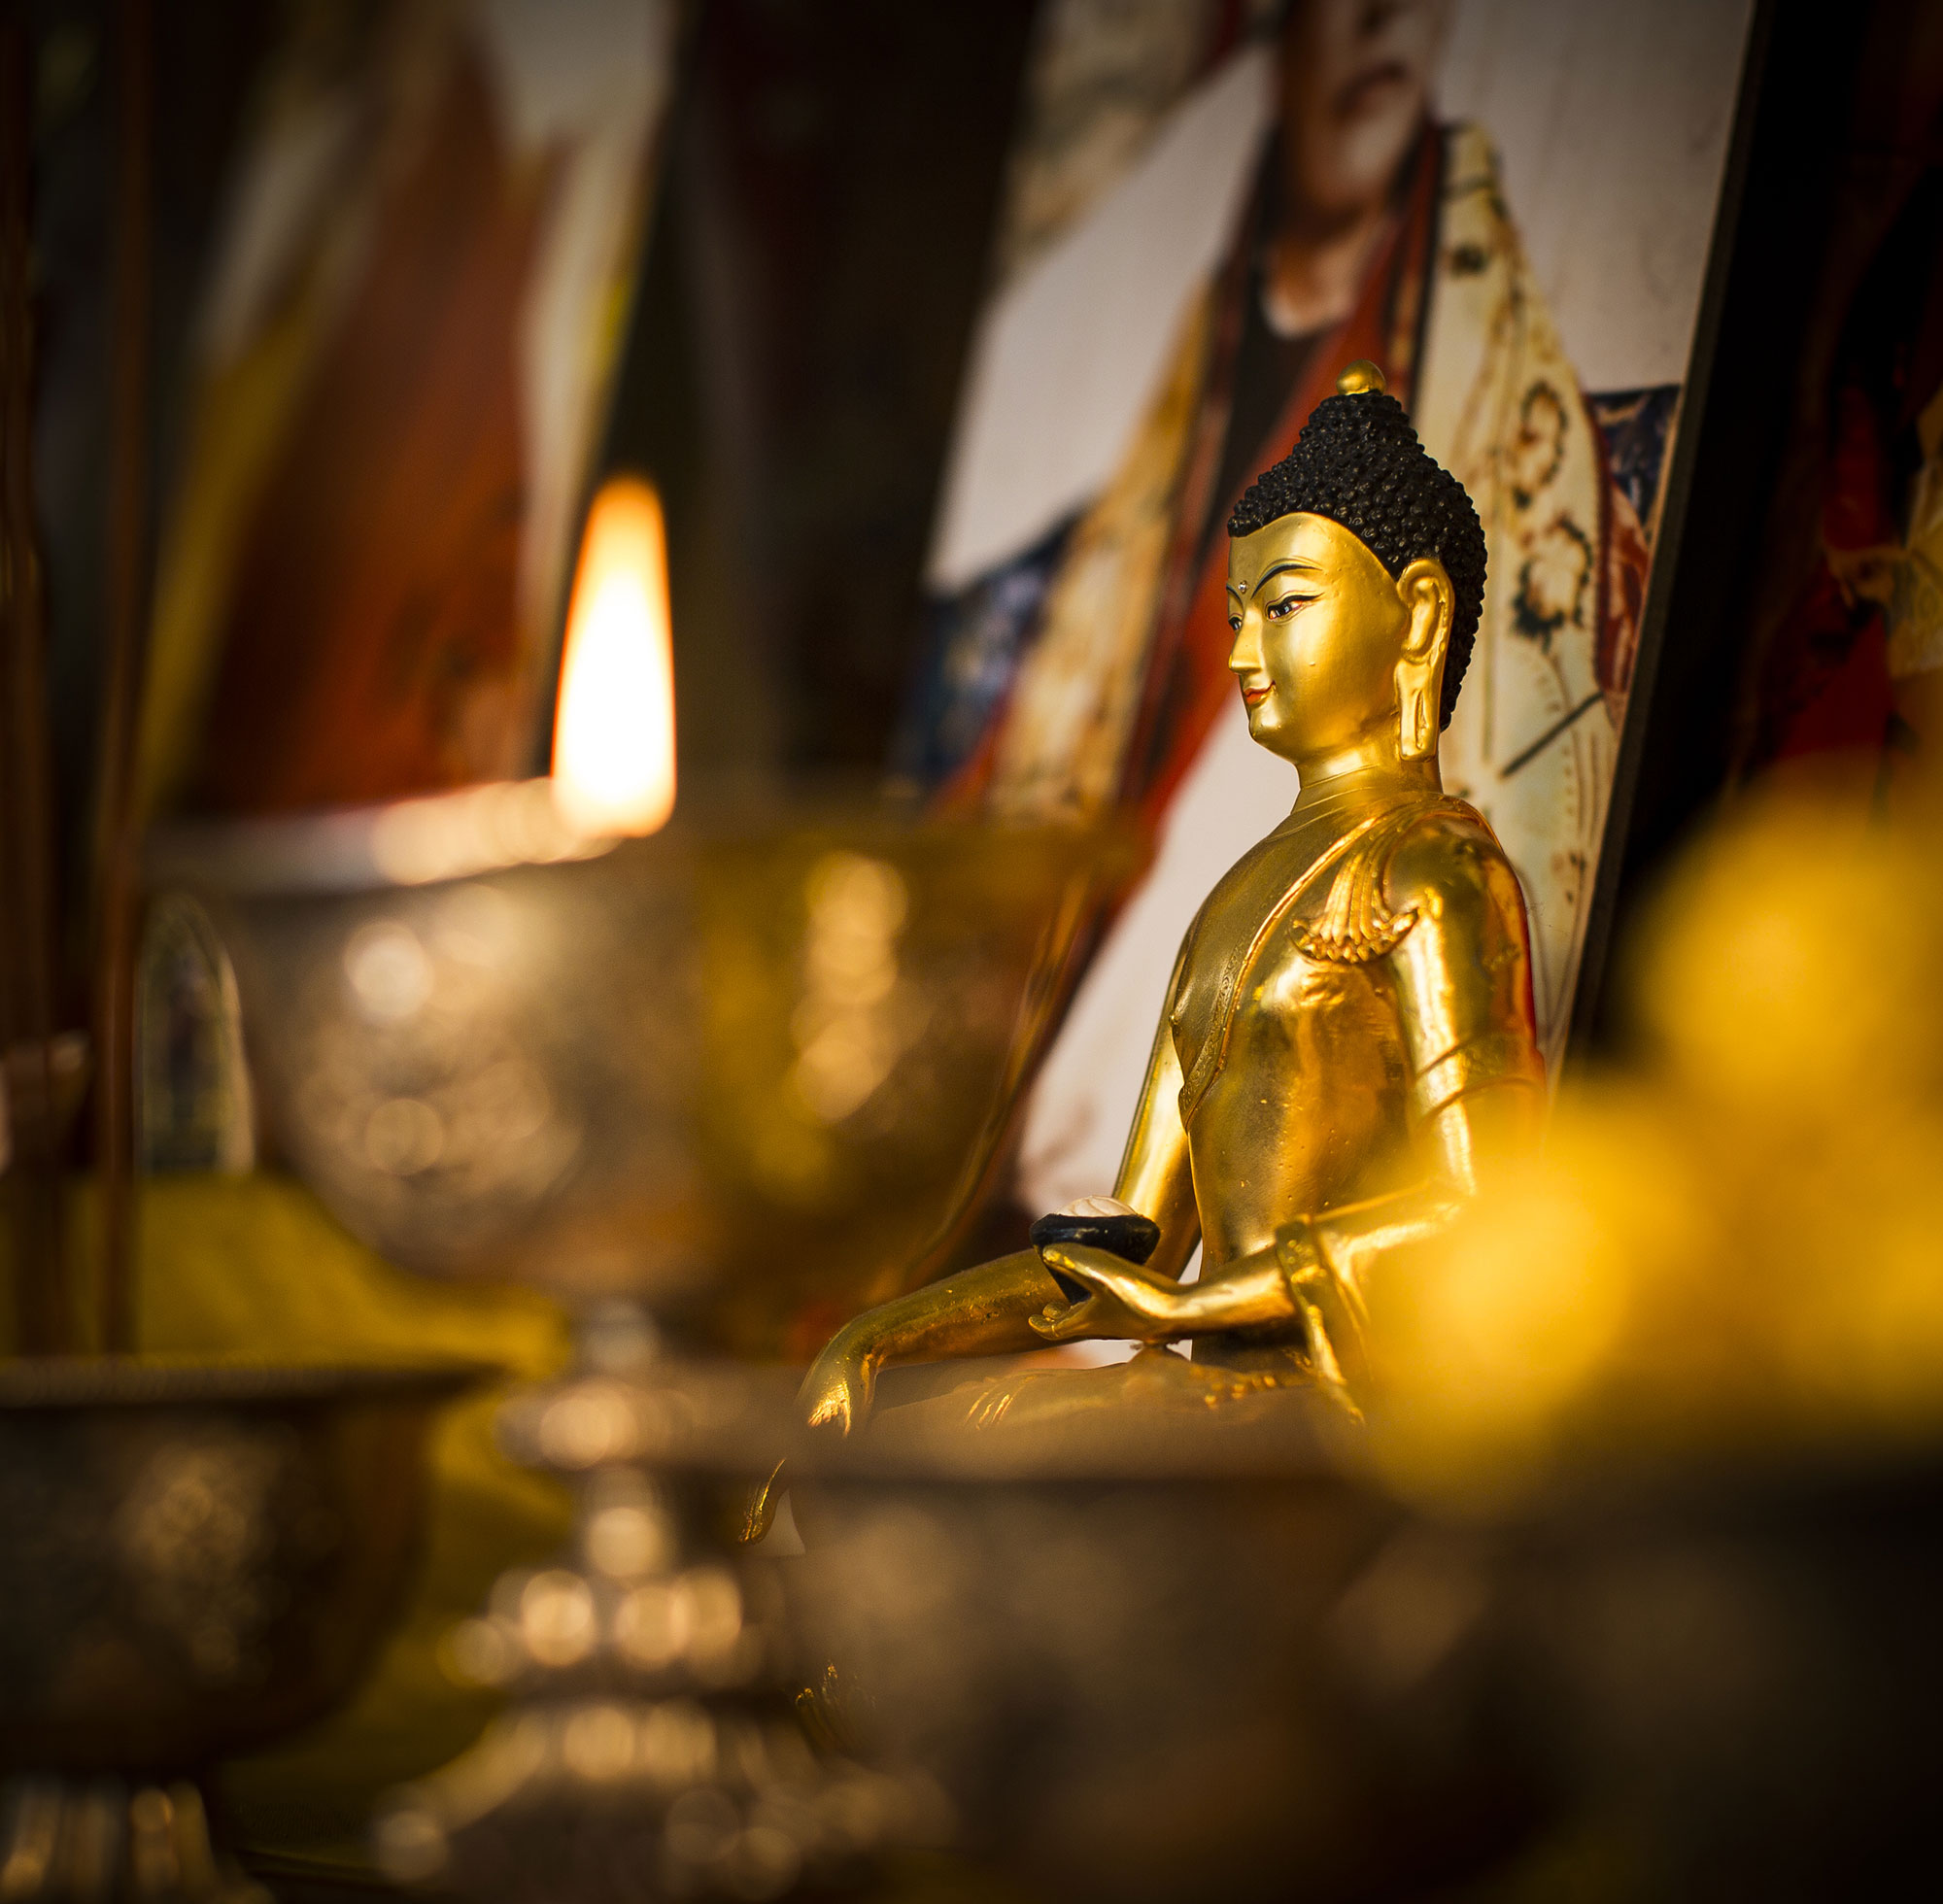 Small statue of the Buddha in candle light